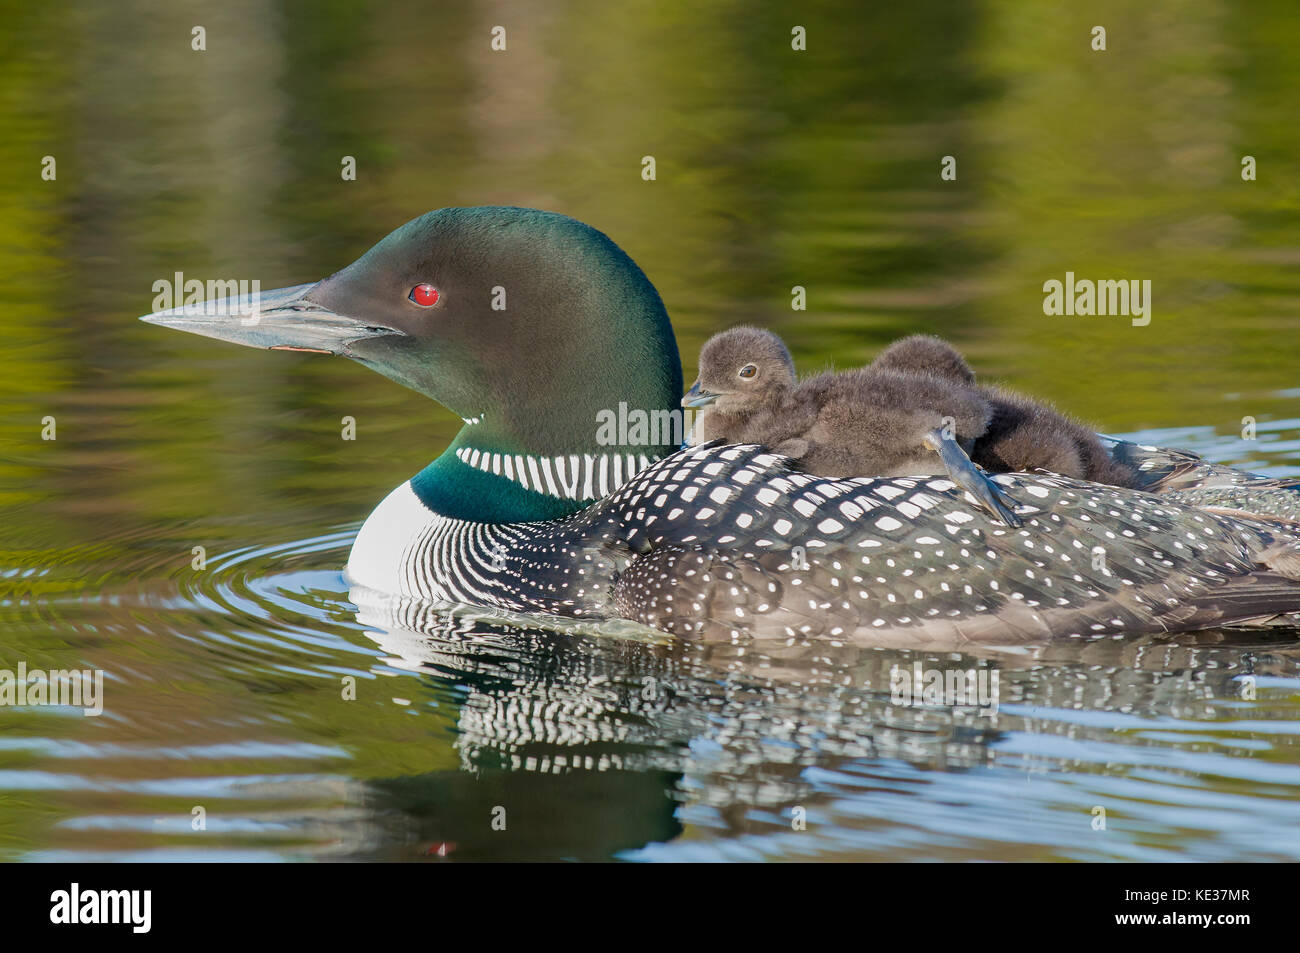 Adult common loon (Gavia immer) and chicks back-riding as they do for the first two weeks after hatching, central Alberta, Canada Stock Photo